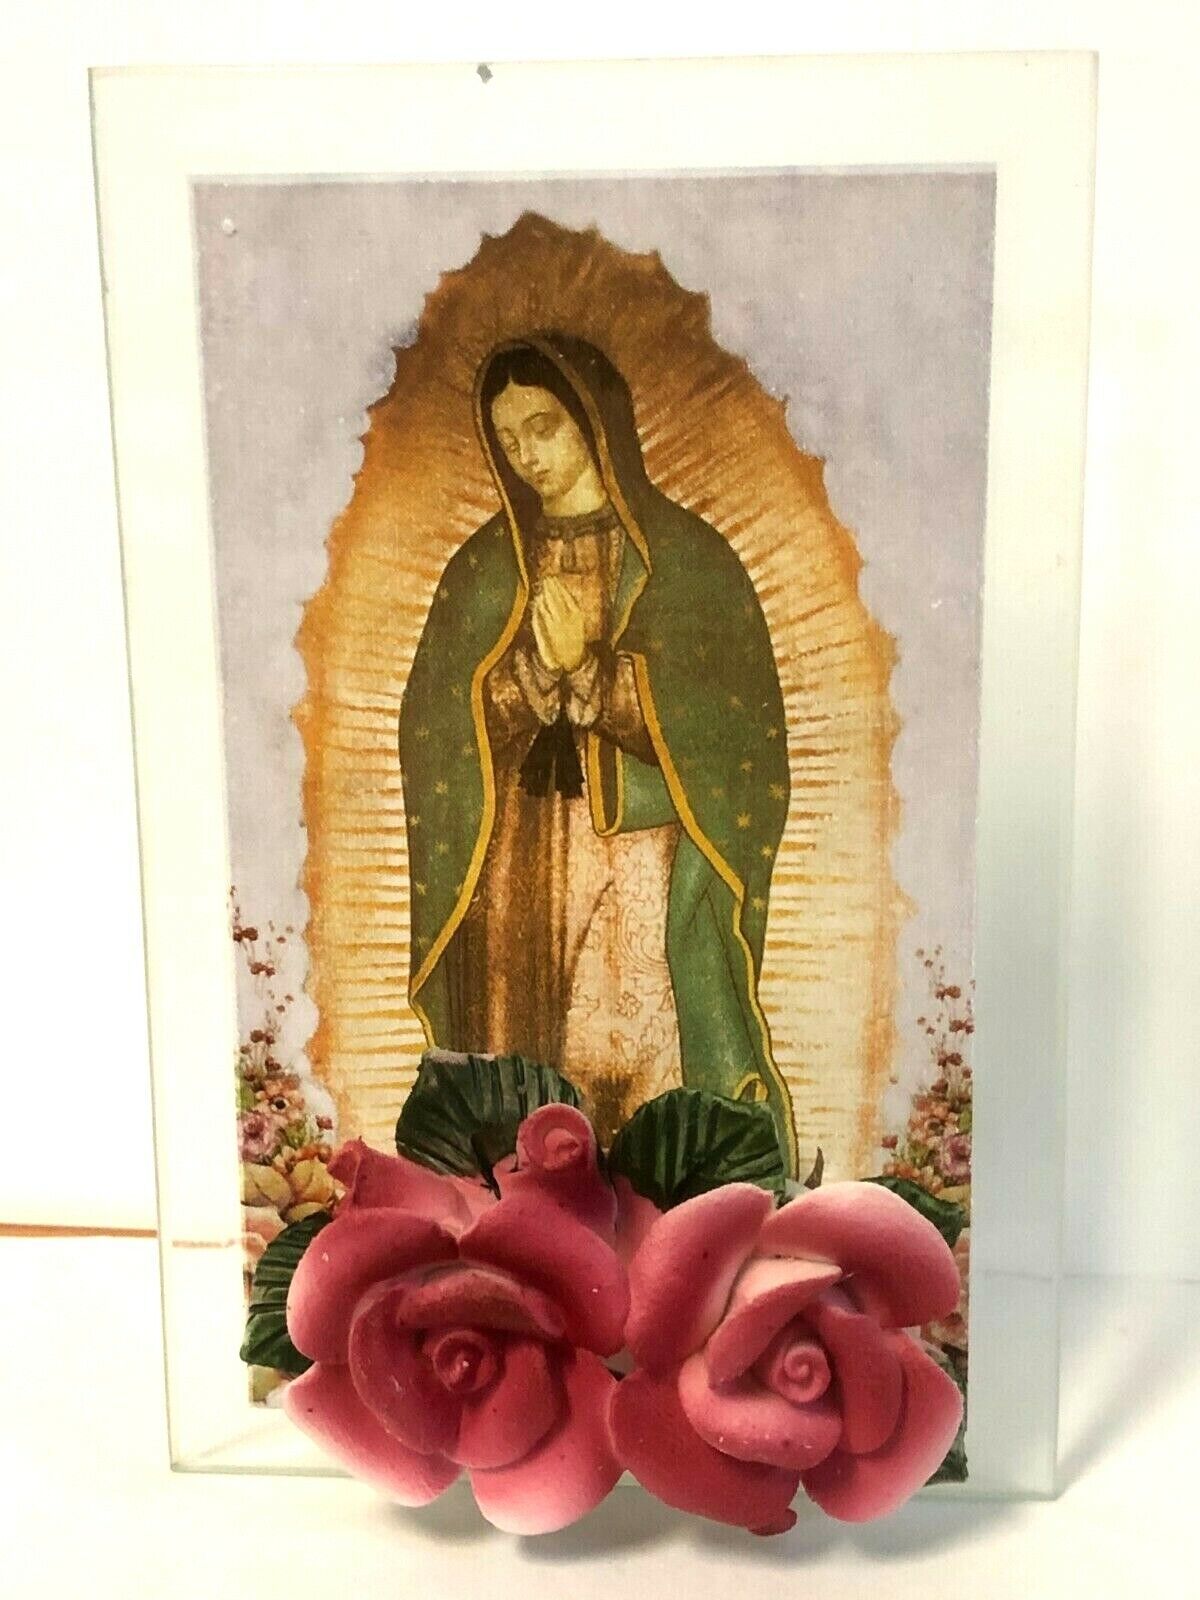 Our Lady of Guadalupe Votive Glass Holder 4.75", New - Bob and Penny Lord